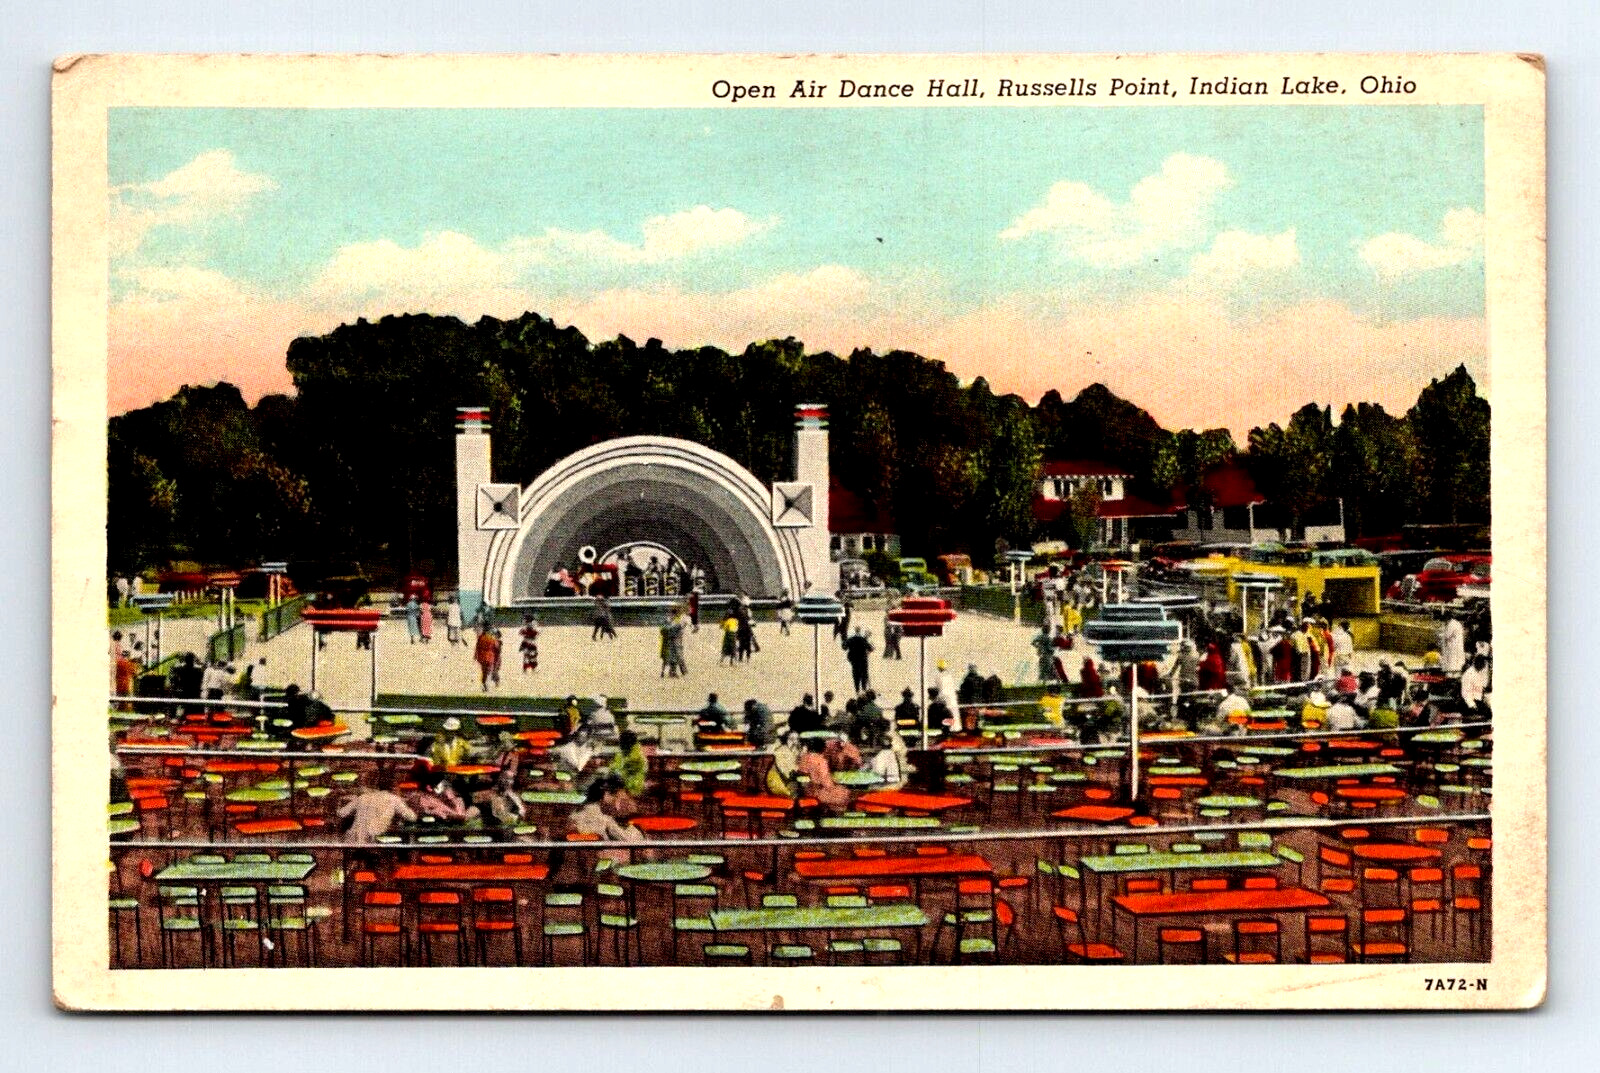 posted postcard 5.5x3.5 in Open Air Dance Hall Russells Point, Indian Lake Ohio